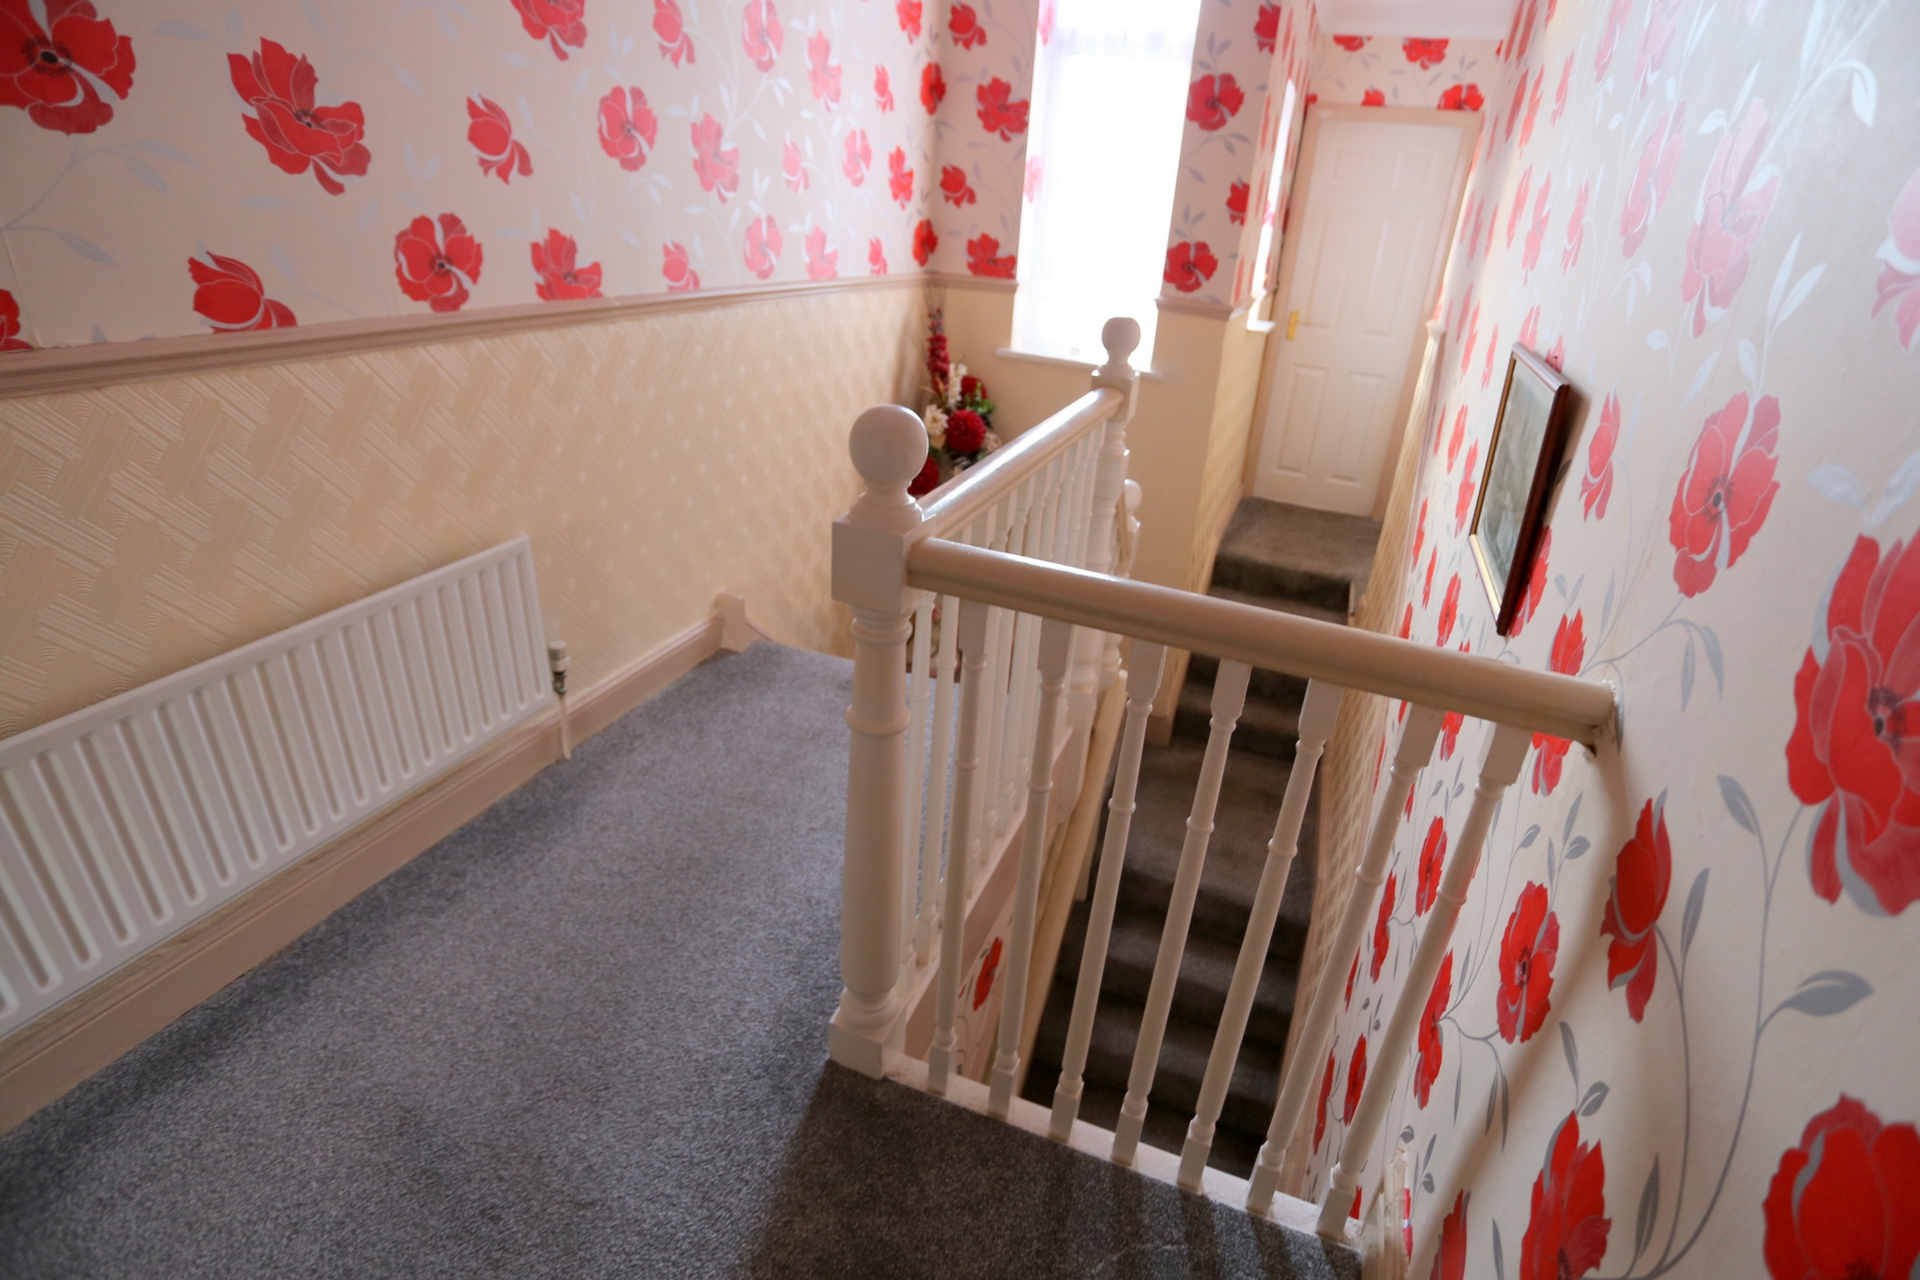 3 bedrooms terraced, 12a Cemetery View Longton Stoke on Trent Staffordshire